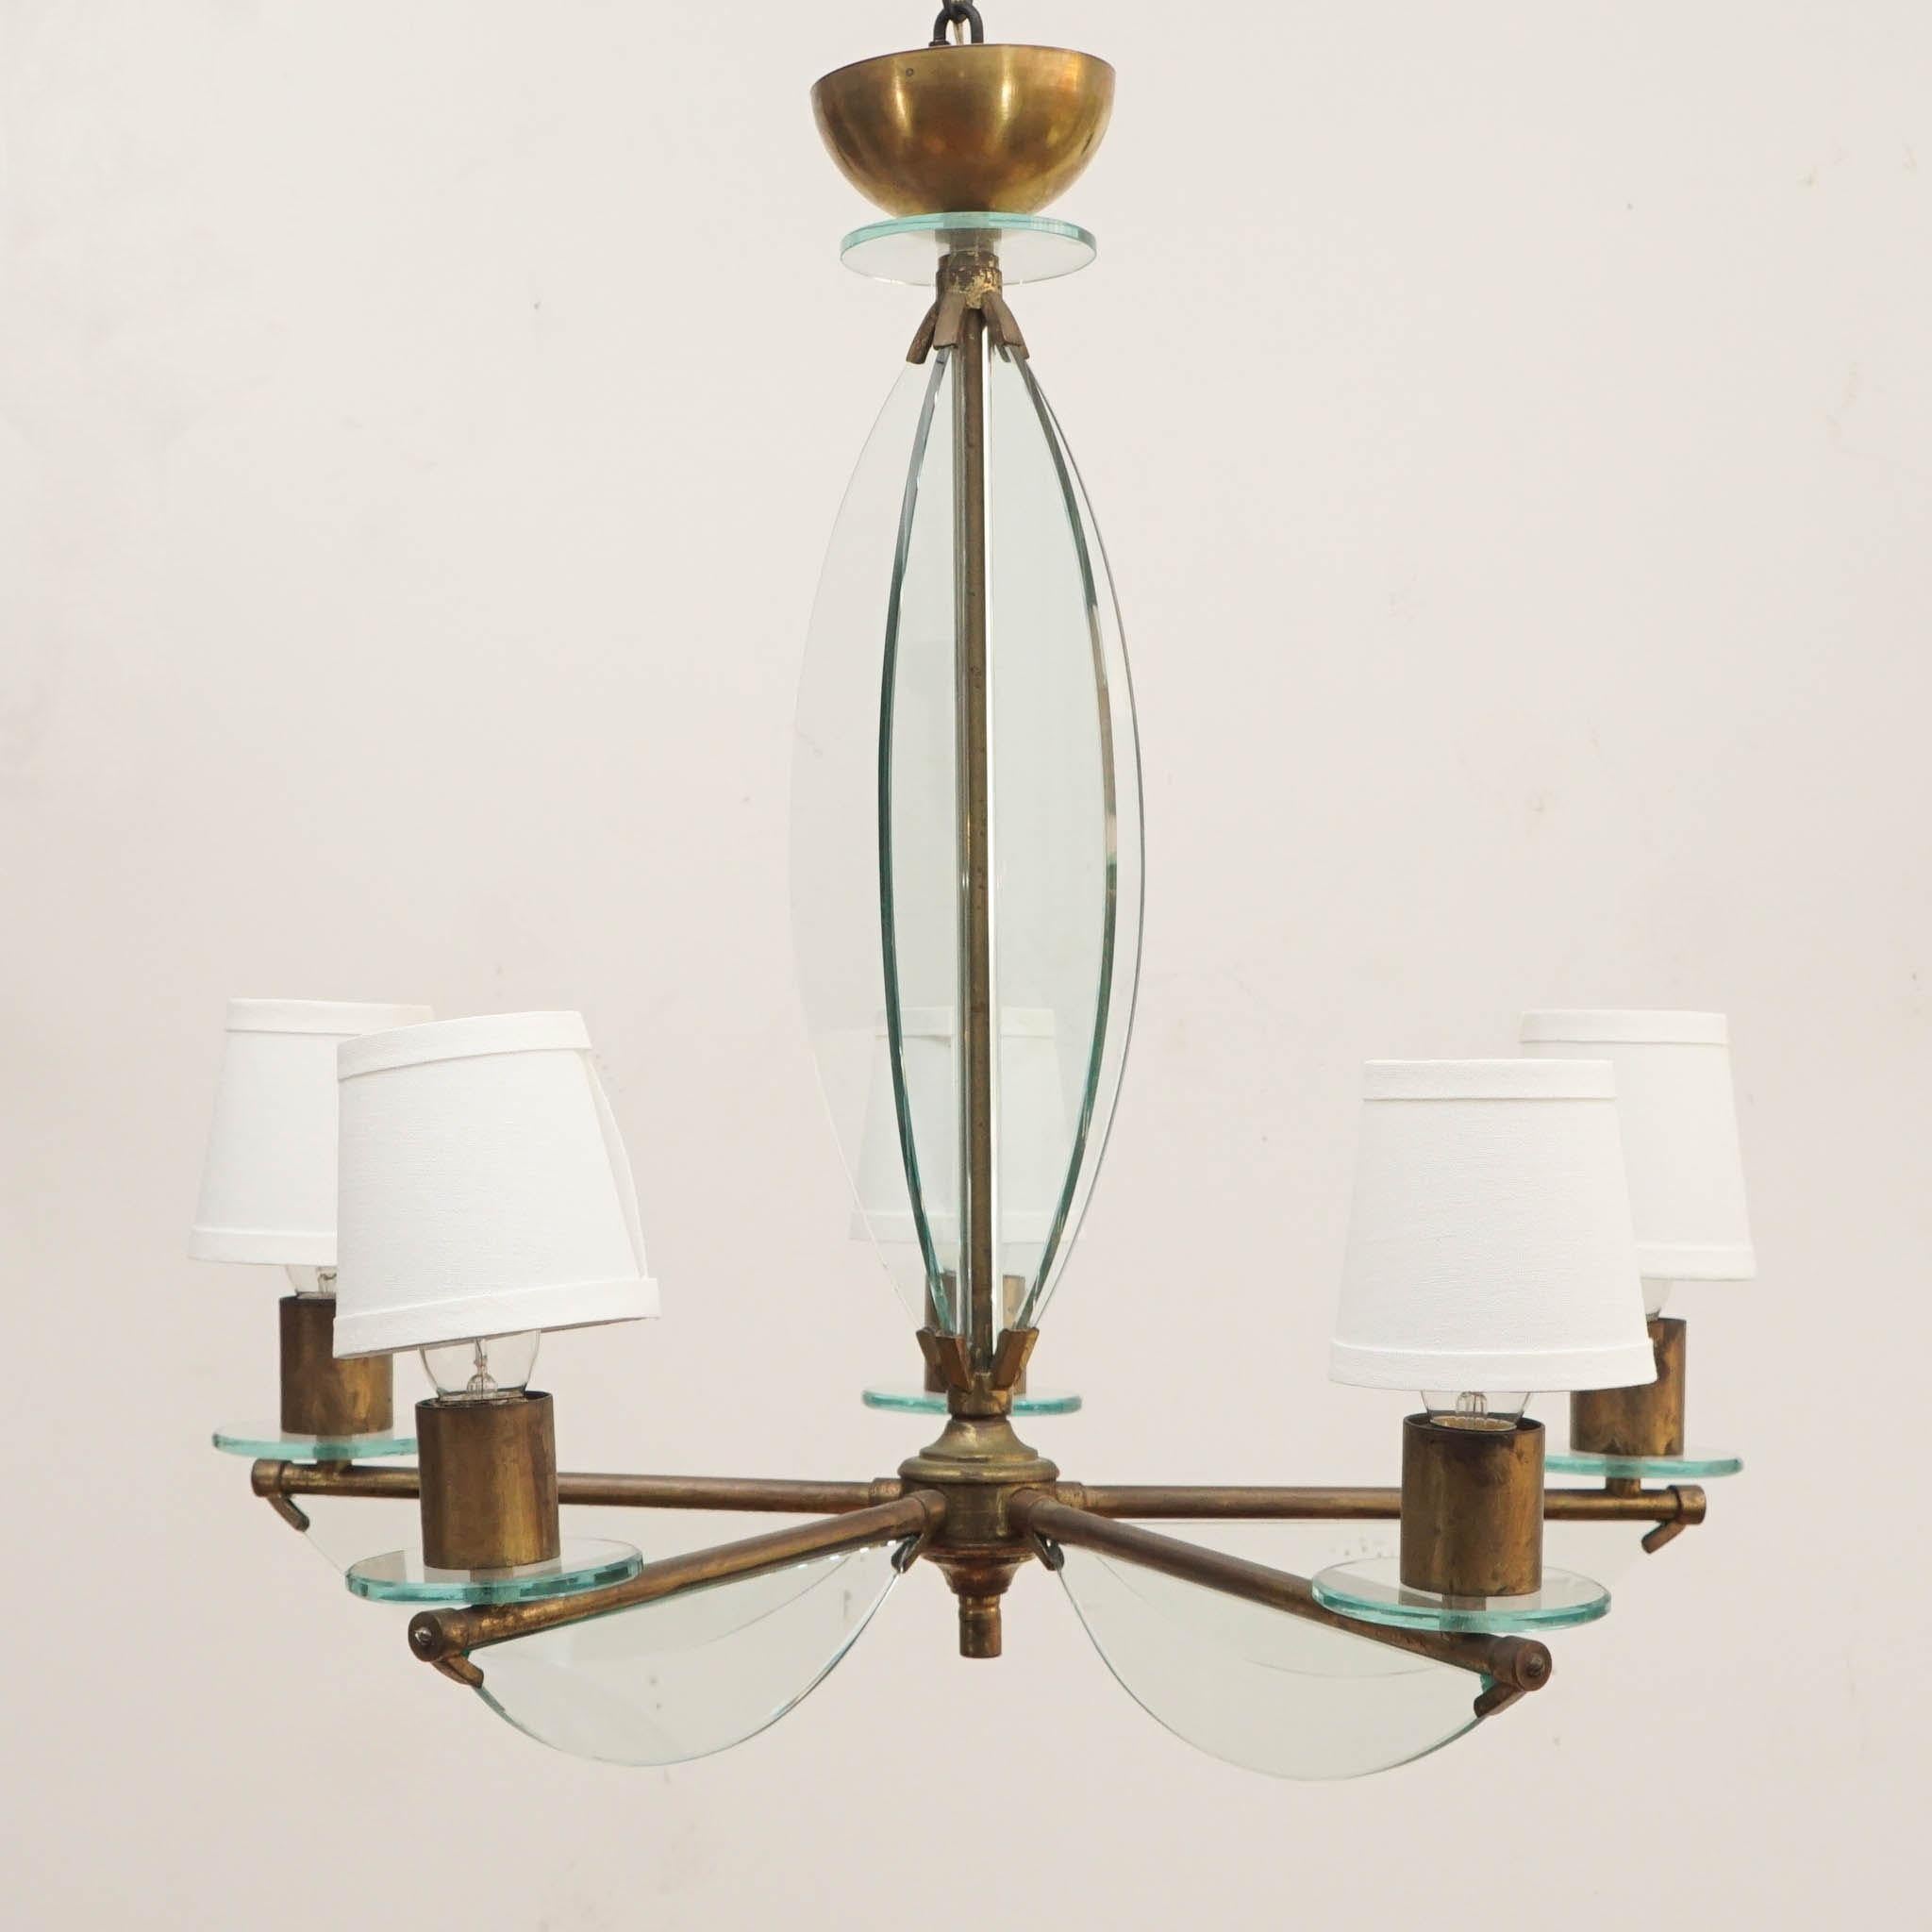 Inspired by the timeless elegance of Fontana Arte designs, this antique brass and glass chandelier exudes a refined simplicity that is sure to elevate any space. The classic combination of brass and glass creates a sophisticated and luxurious